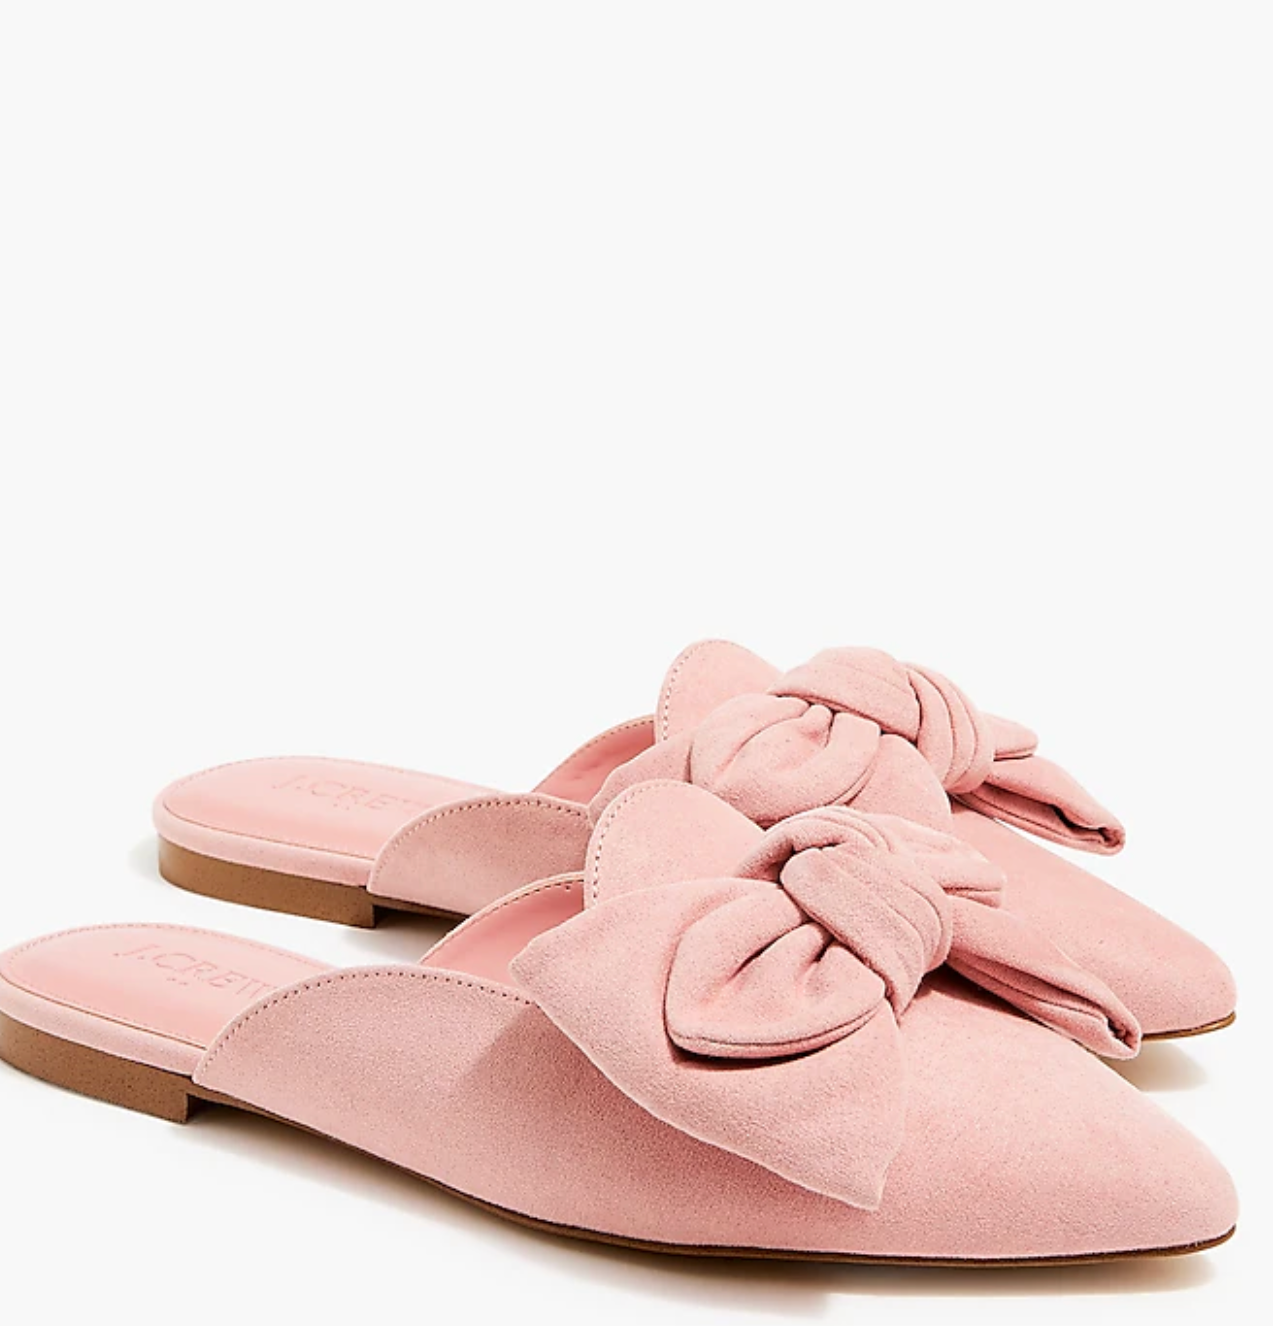 Pointed-toe loafer mules